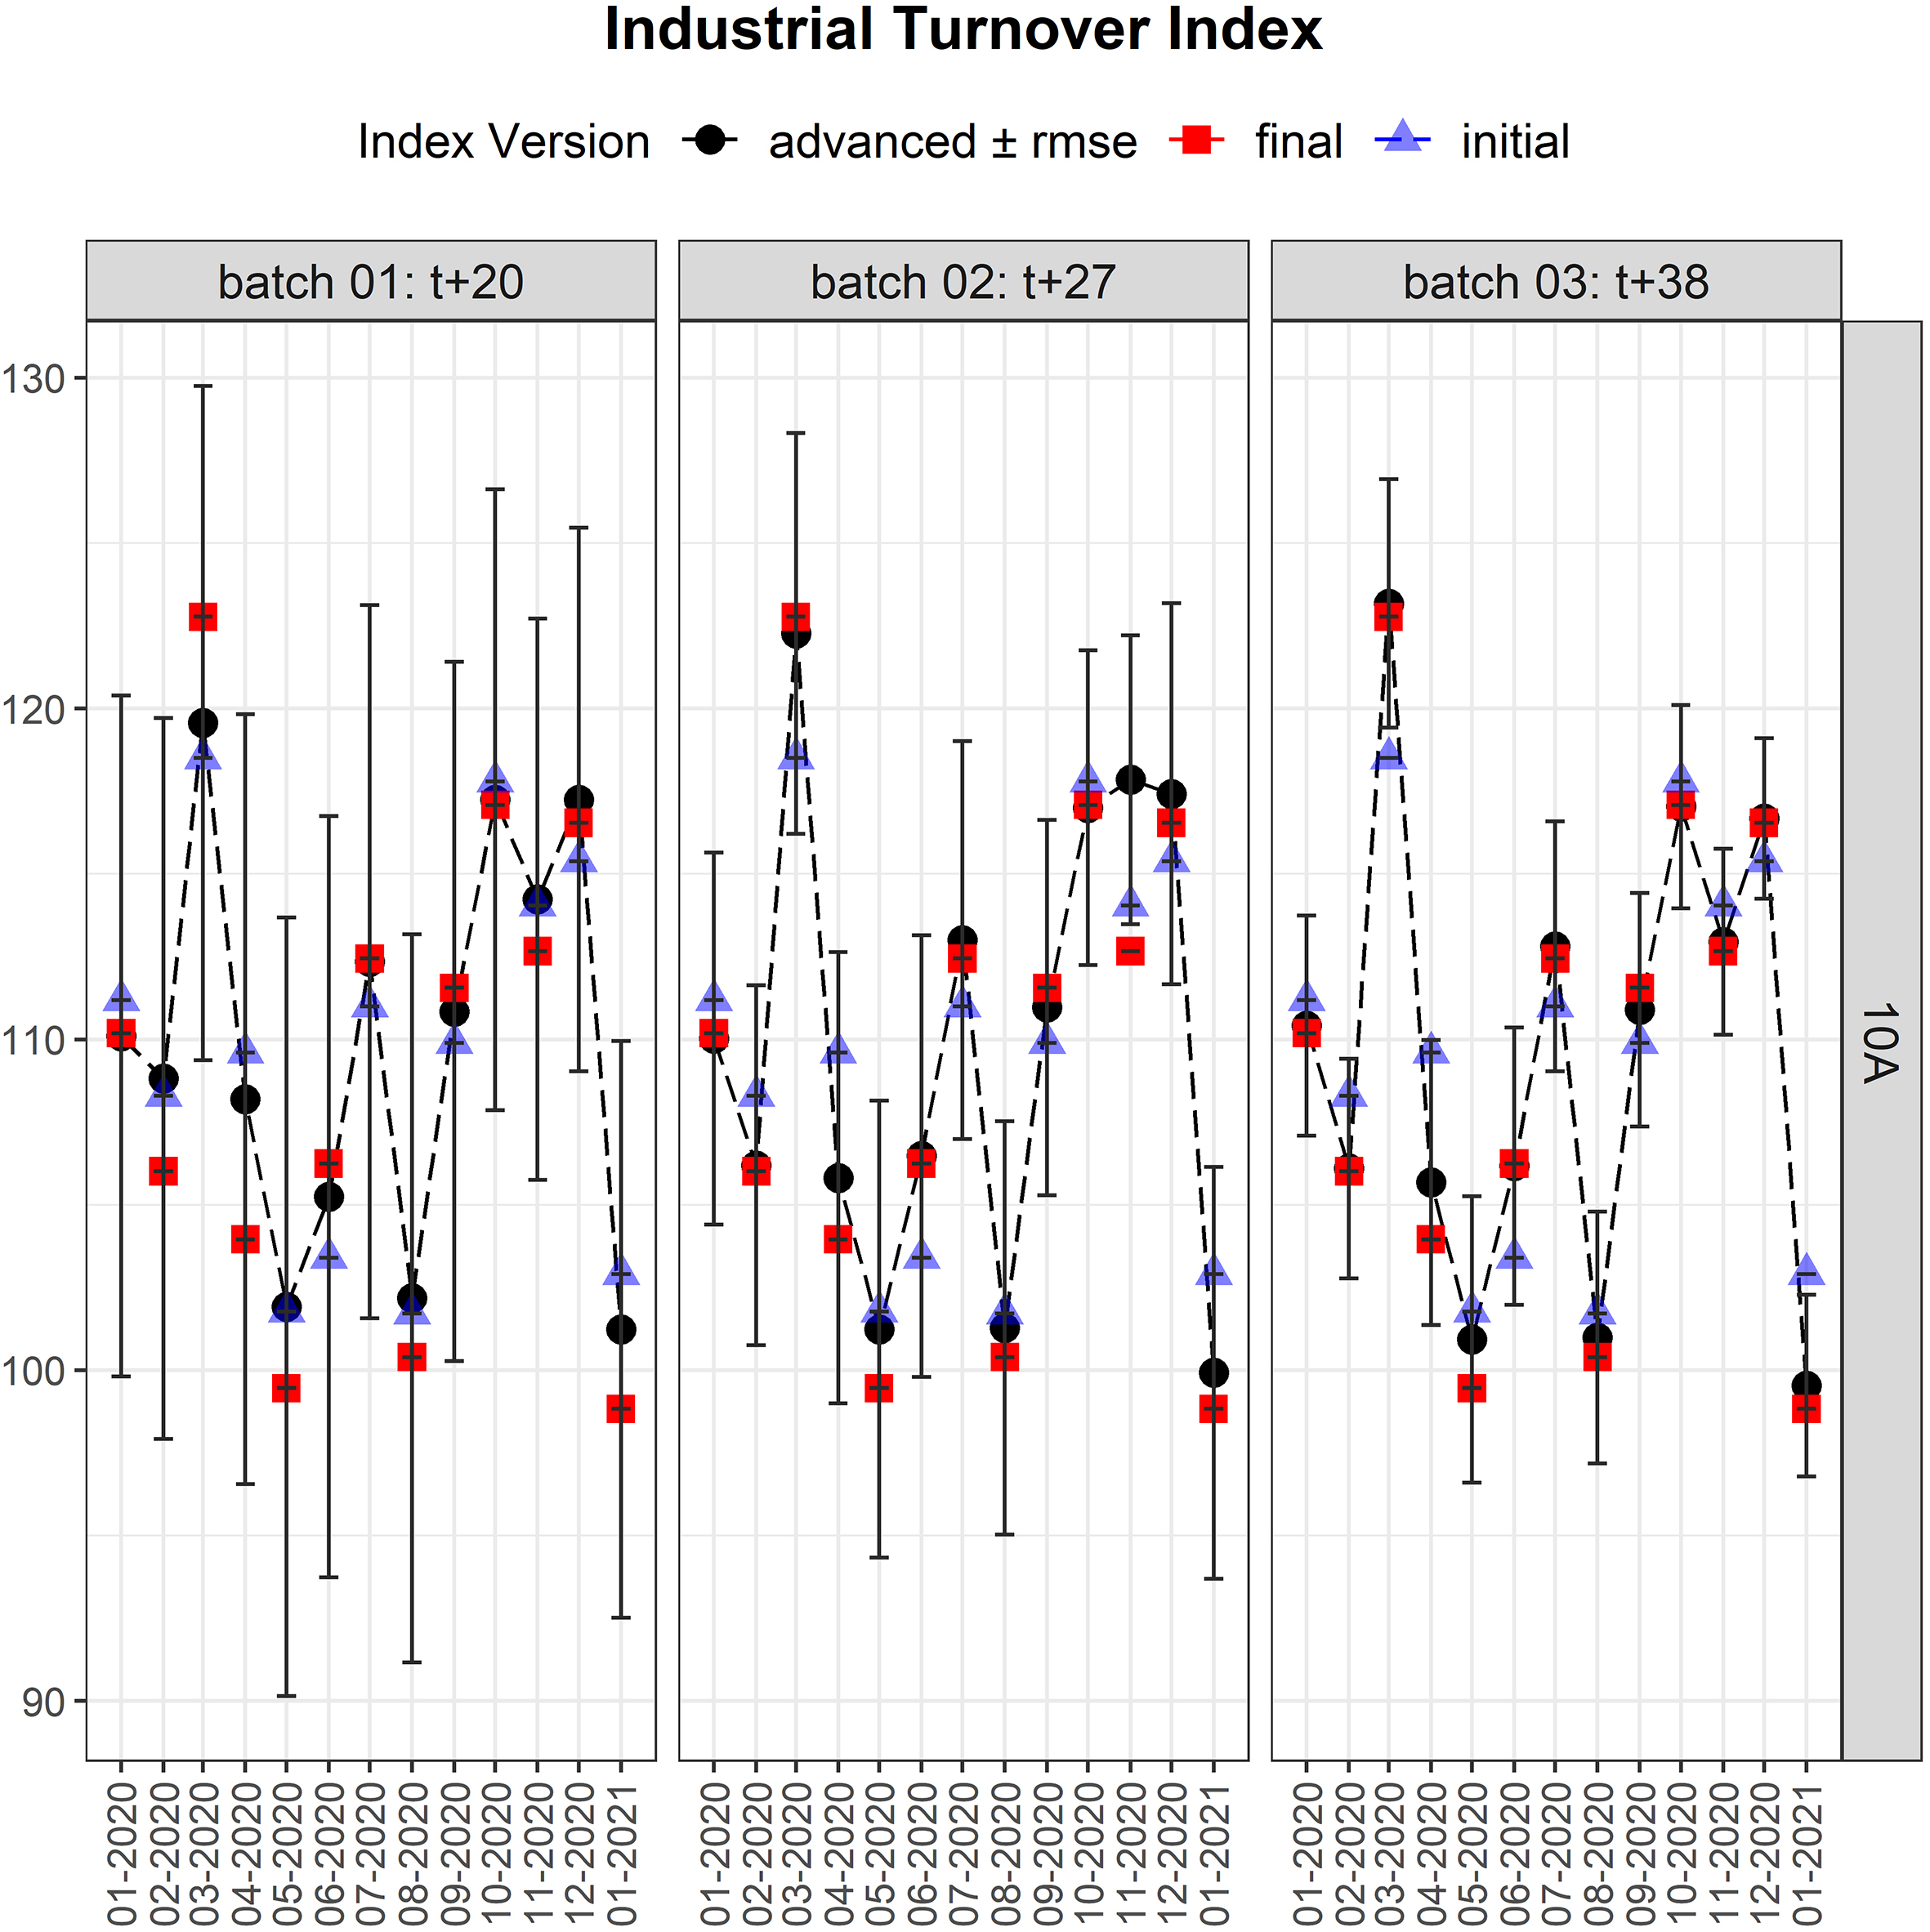 General Advanced Industrial Turnover Index disaggregated by CNAE-09.